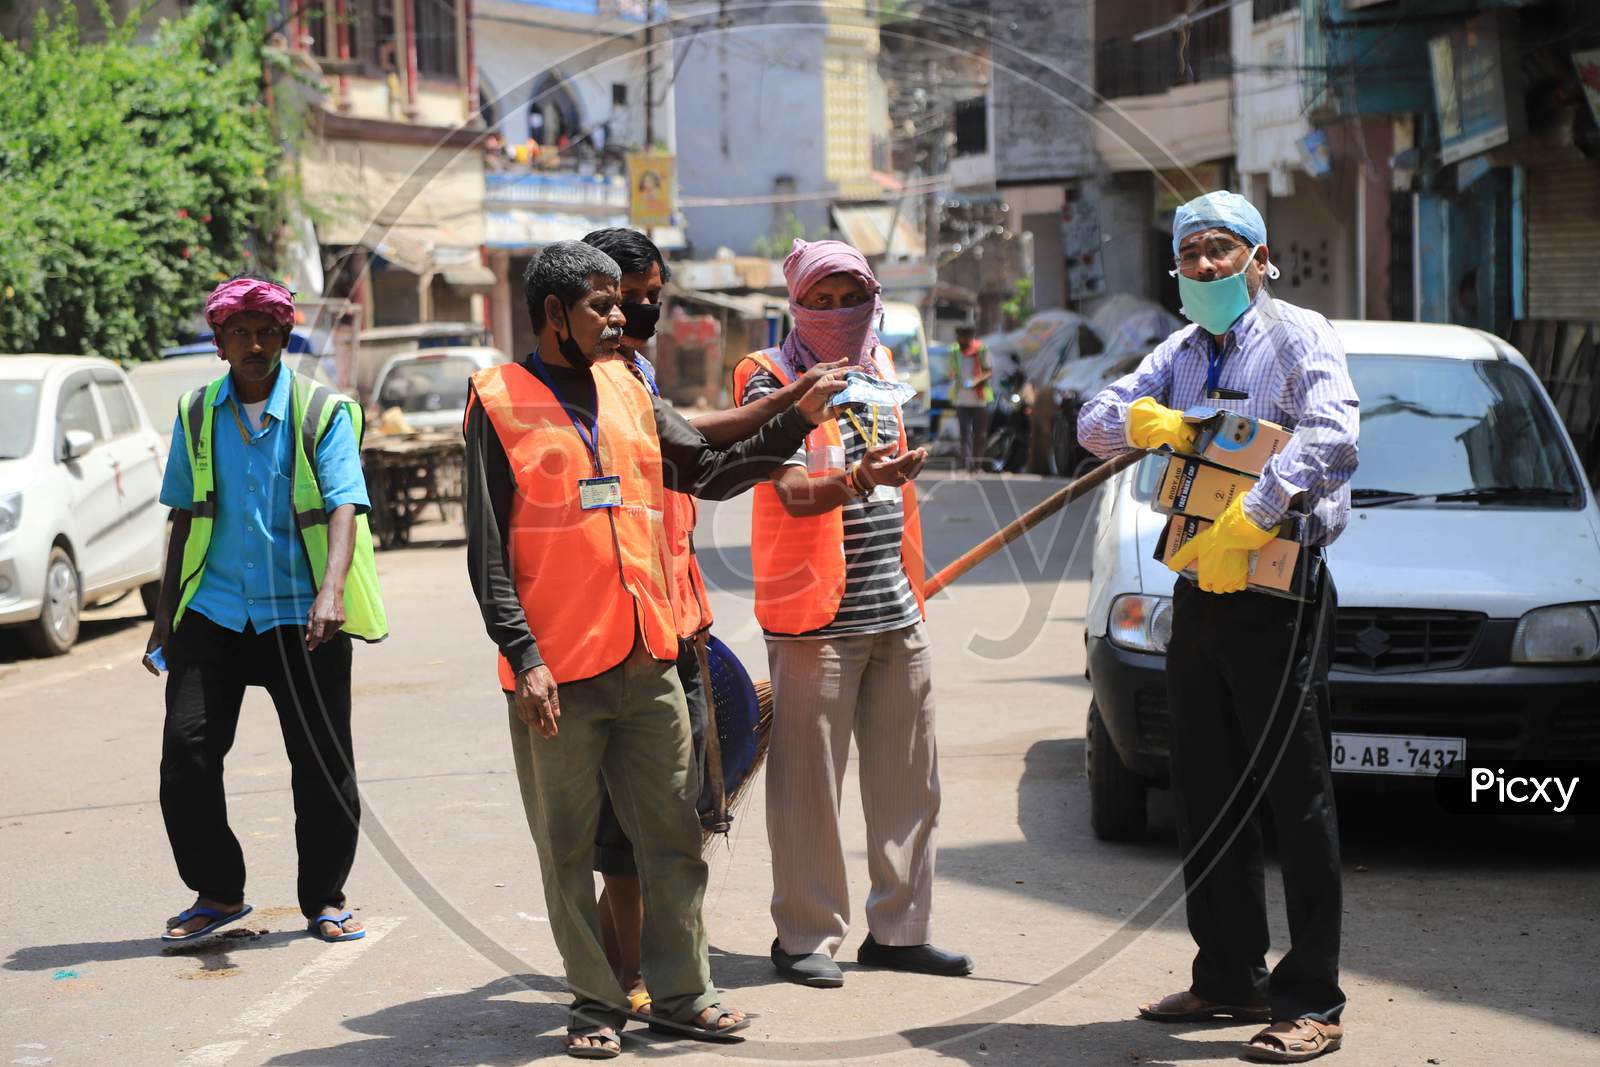 A Man Distributes Mask And Head Cover To Municipal Corporation Workers During Nationwide Lockdown In Wake Of Coronavirus  or COVID-19  Pandemic In Prayagraj, March 12, 2020.